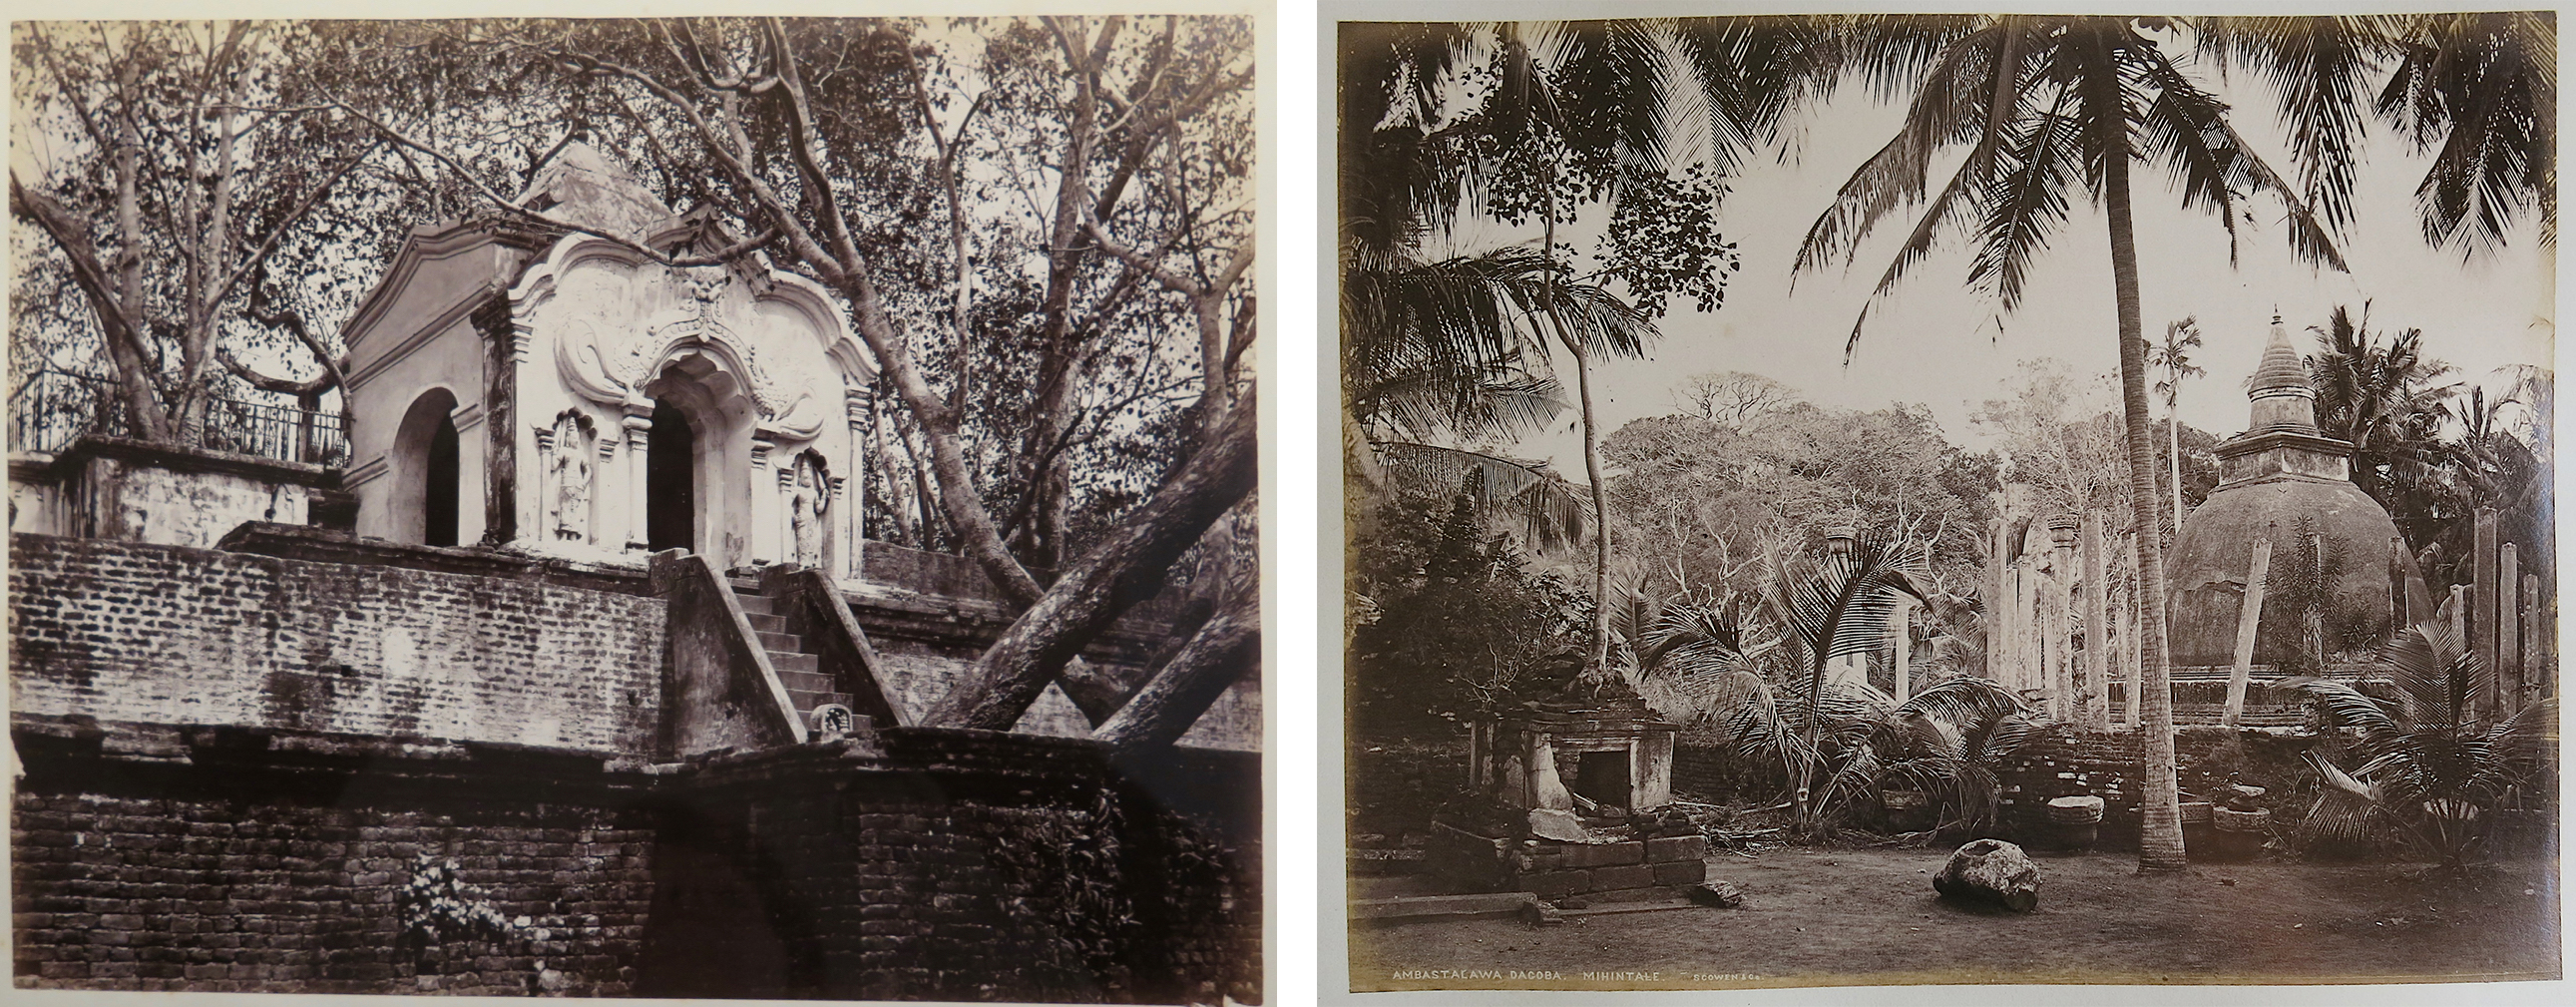 Left: Charles T. Scowen & Co., Gateway on the West Side of the Sacred Bo Tree Enclosure, Sri Lanka, Anuradhapura, c. 1880–90, Collection of Catherine Glynn Benkaim and Barbara Timmer, photo courtesy of the lender; Right: Charles T. Scowen & Co., Ambastalawa [Ambasthala] Dagoba, Mihintale, Sri Lanka, Mihintale, c. 1880, Collection of Catherine Glynn Benkaim and Barbara Timmer, photo courtesy of the lender